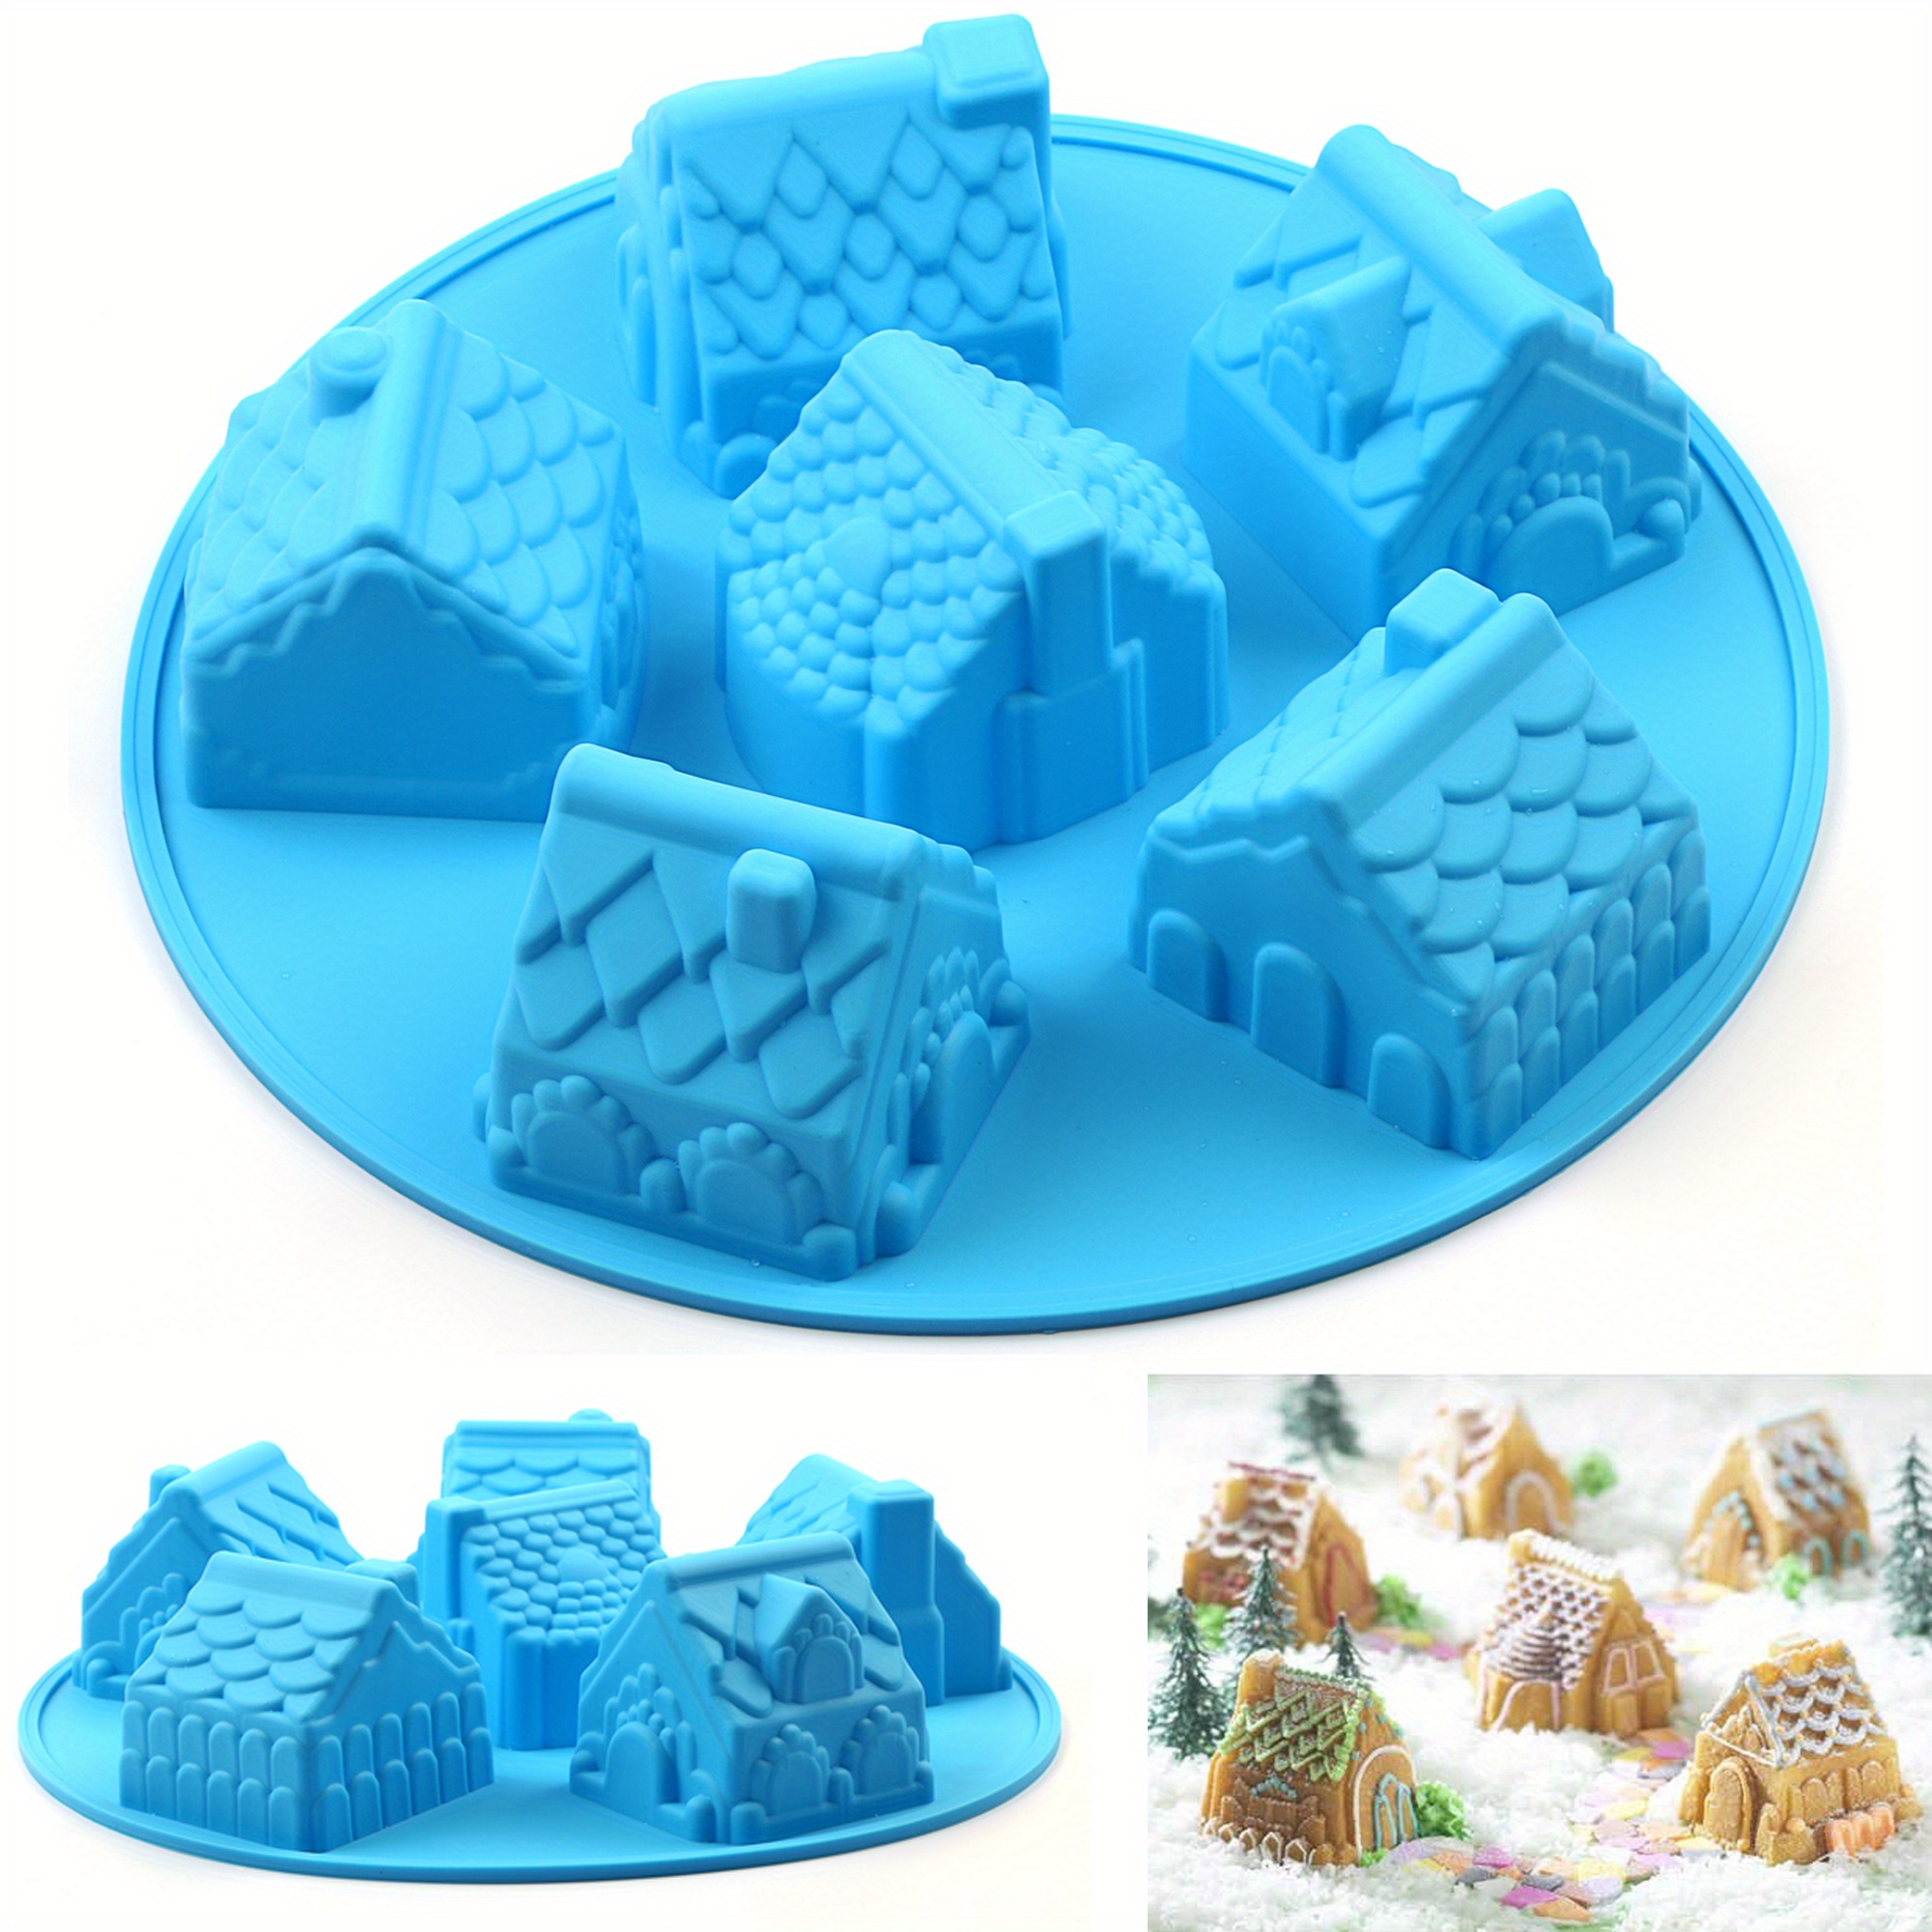 1pc Christmas Silicone Cake Molds - 6 Cavity Gingerbread House Baking  Molds, Non-Stick Round Cake Pan Bakeware For Cake Decoration, Cupcake,  Candy, Je